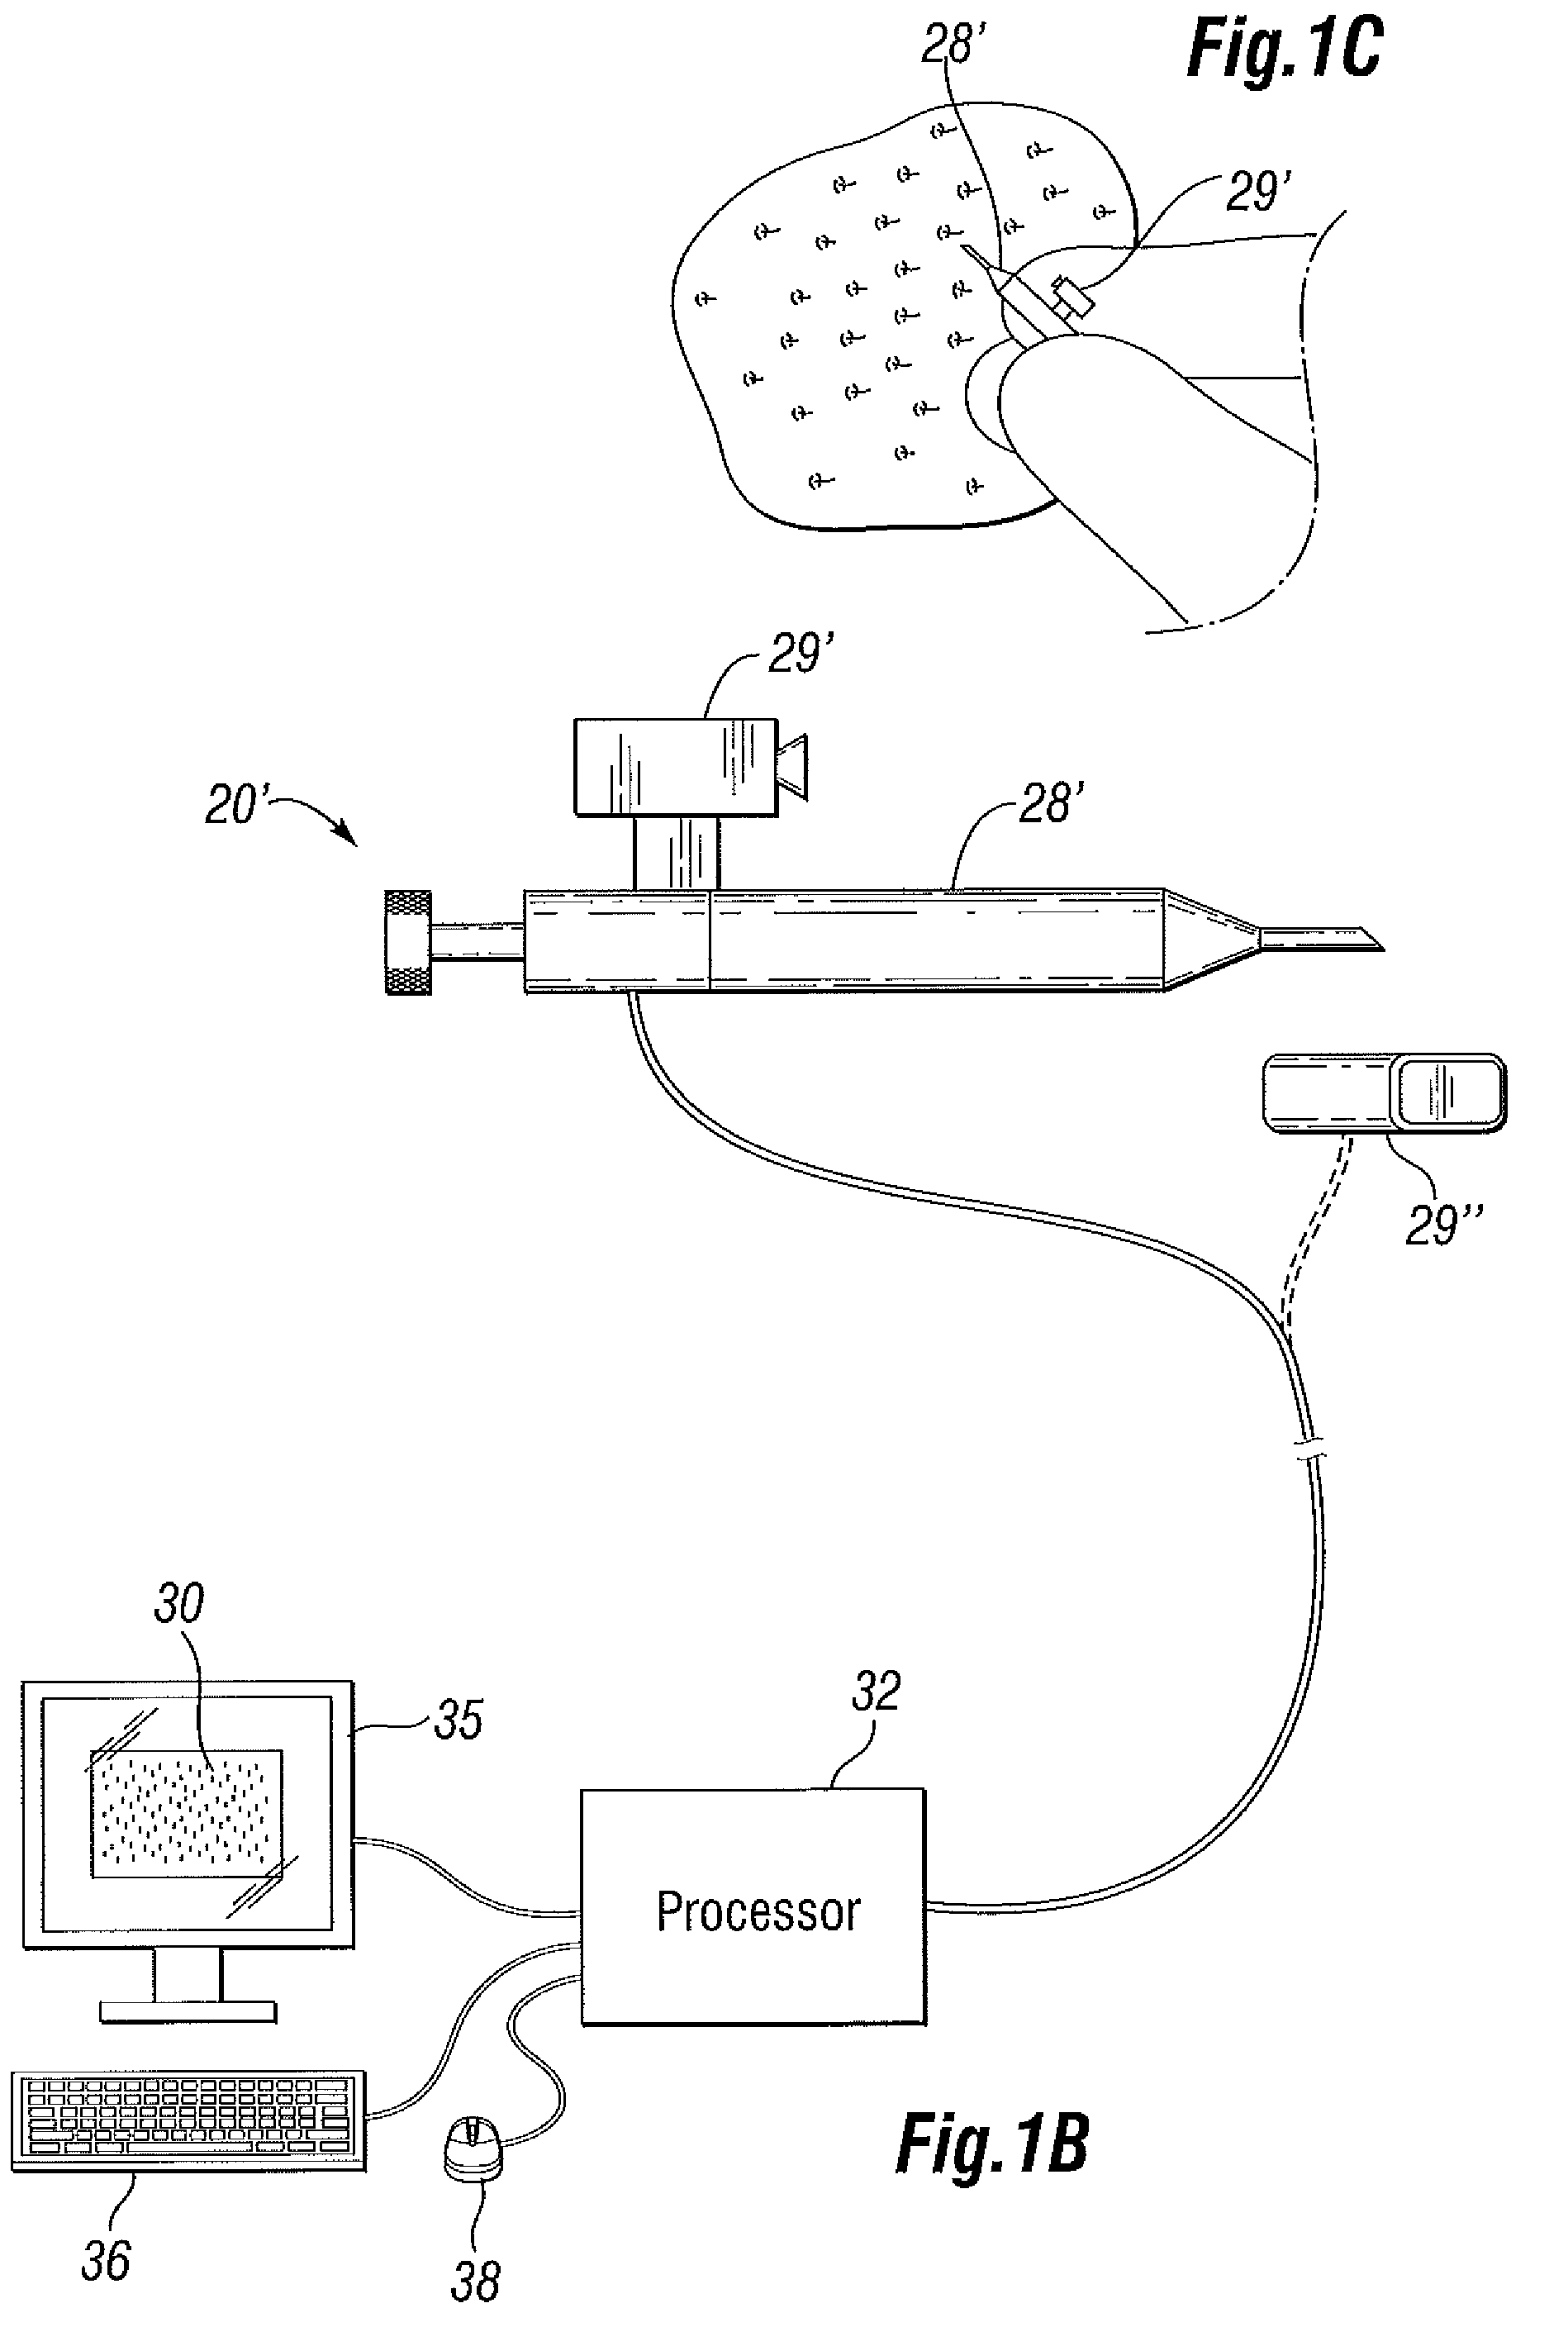 Systems and methods for improving follicular unit harvesting